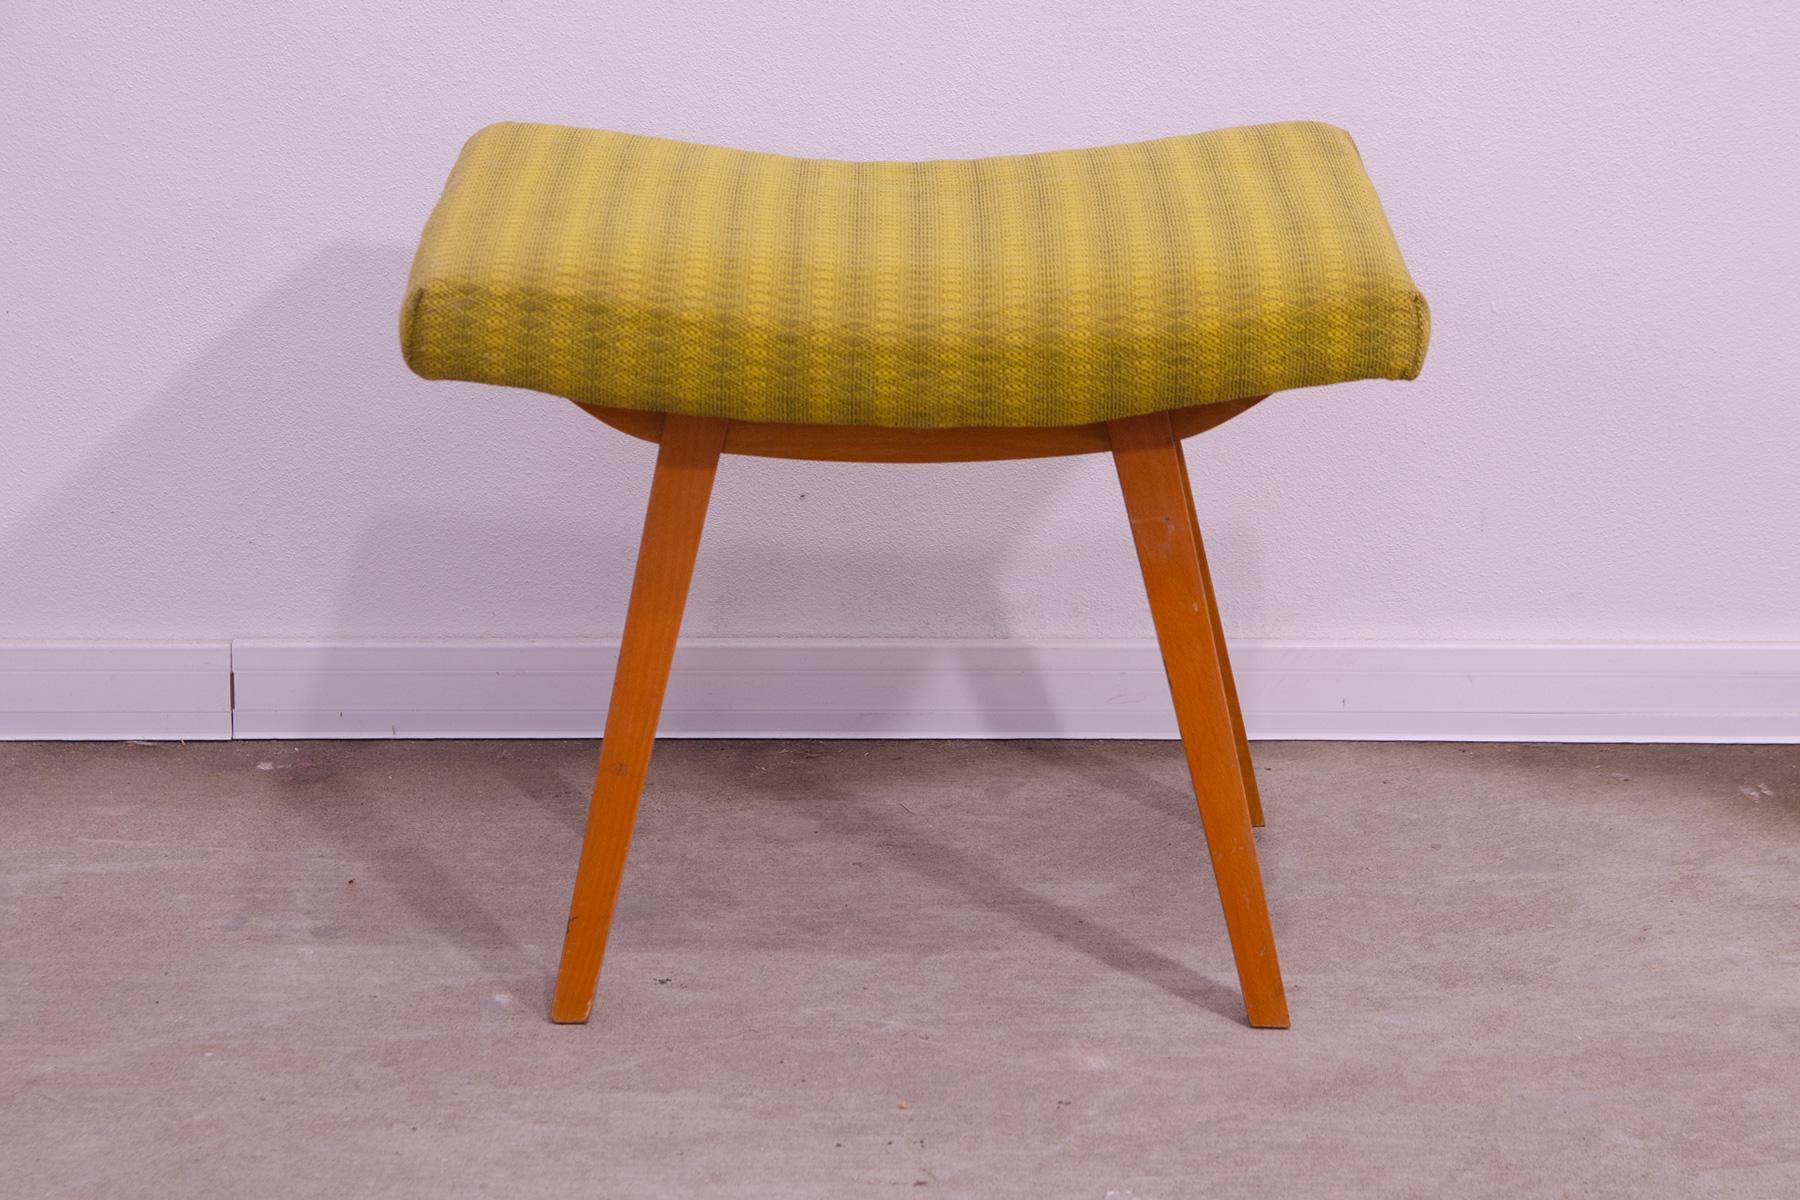 This midcentury  stool/footrest was made by Západoslovenské nábytkárské Závody in the former Czechoslovakia in the 1970´s. It has leatherette seat and the structure is made of beech wood. In good Vintage condition, showing signs of age and